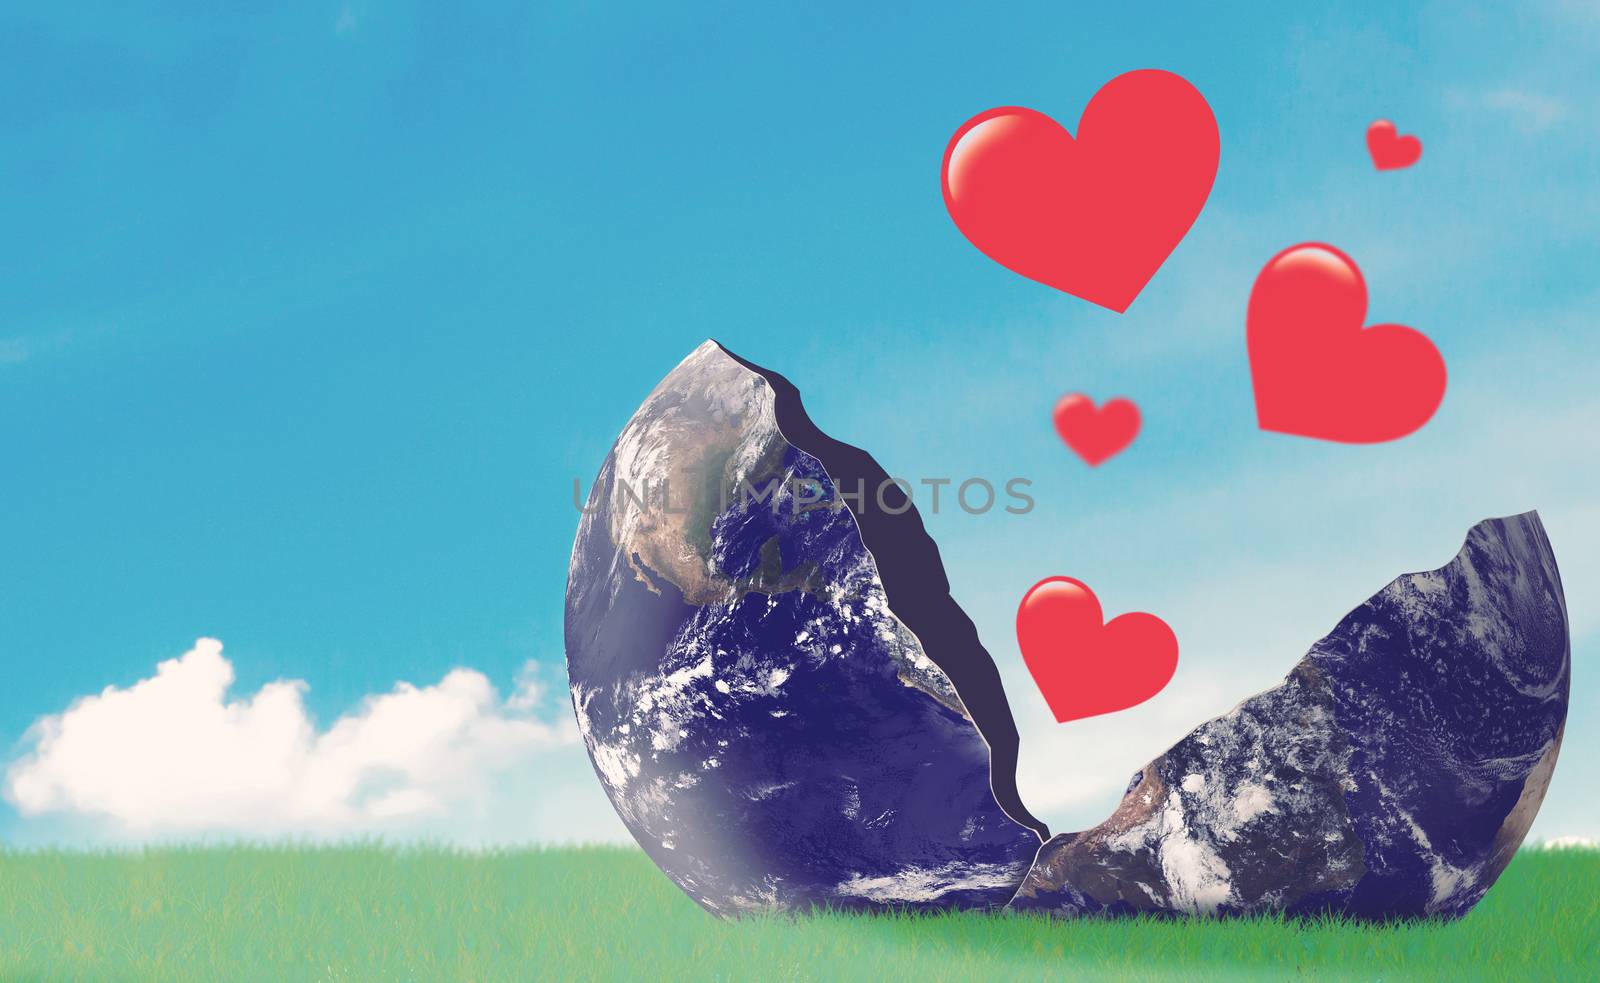 Red heart flying on blue sky background, valentine day, romantic and falling in love concept, Elements of this image furnished by NASA